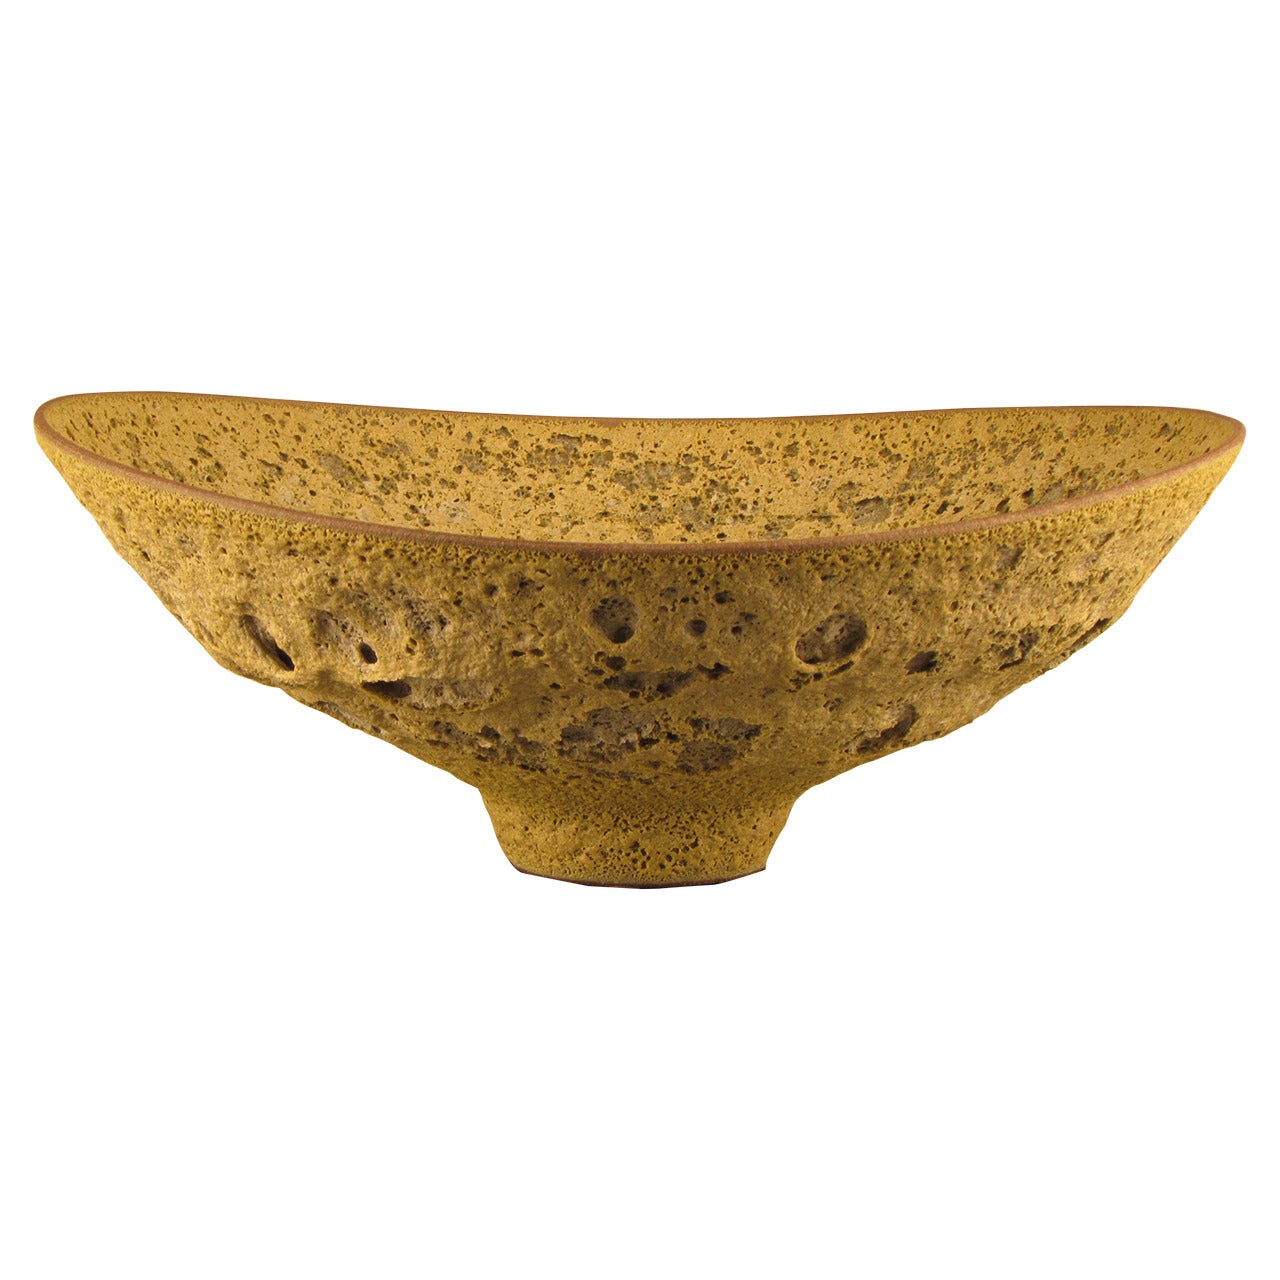 Spectacular Footed Bowl with Chartreuse Crater Glaze by Jeremy Briddell, 2015